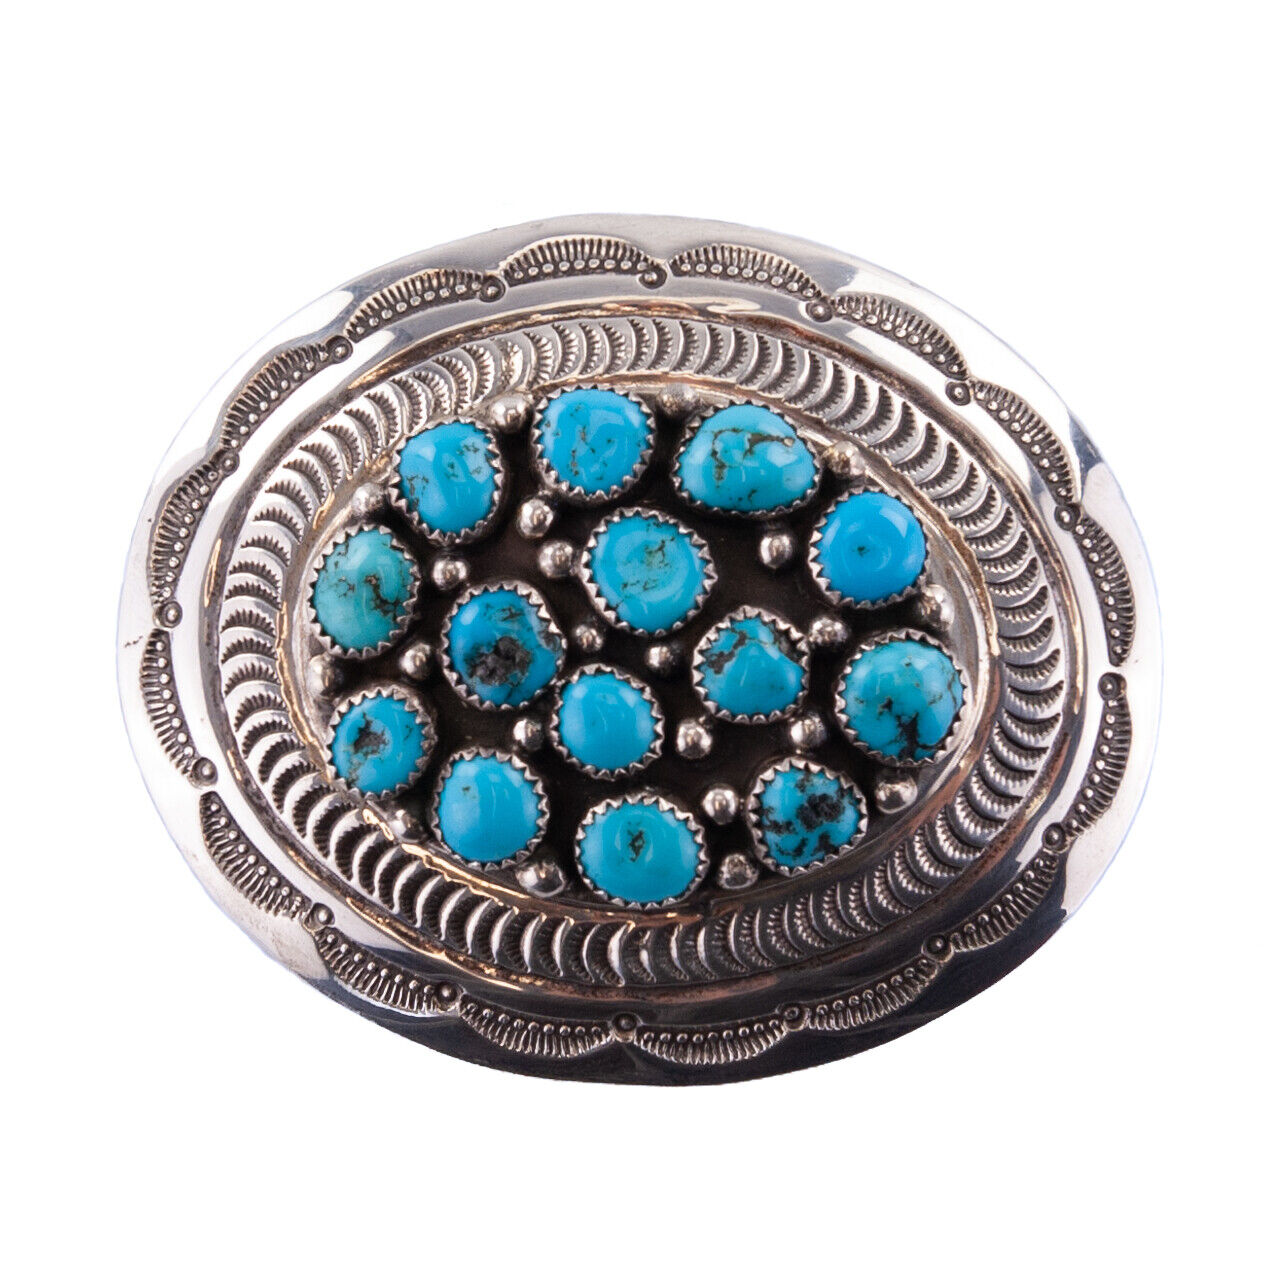 Navajo Thompson Platero Sterling Silver & Turquoise Belt Buckle Signed - Vintage